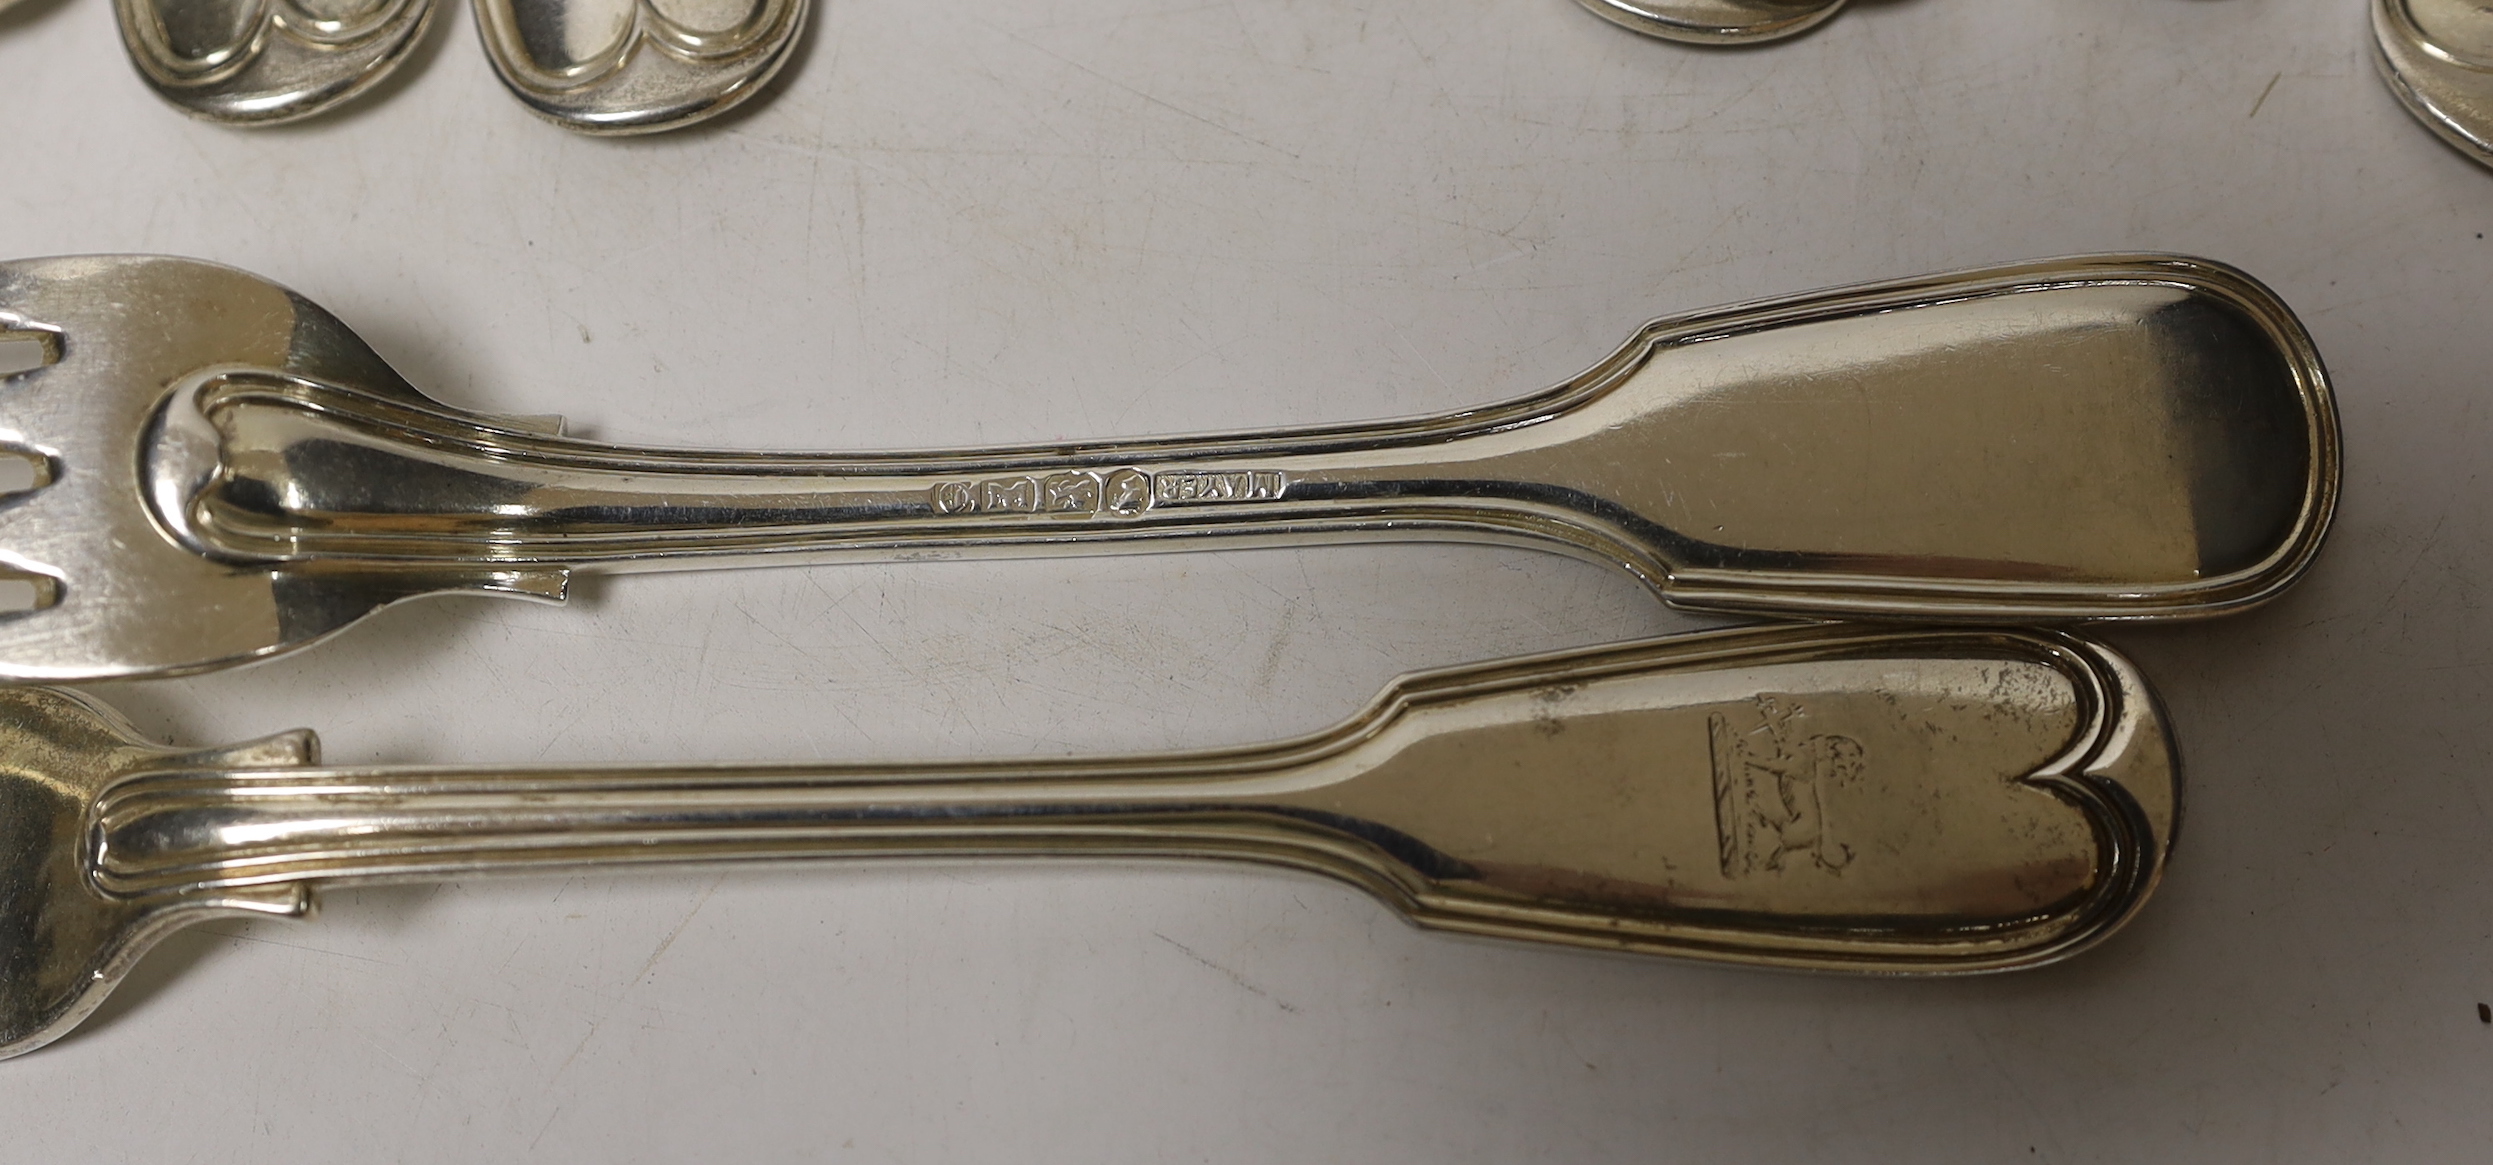 A matched set of twelve 19th century silver fiddle and thread pattern table forks, various dates and makers, including Exeter, some hallmarks very rubbed, 36.1oz.